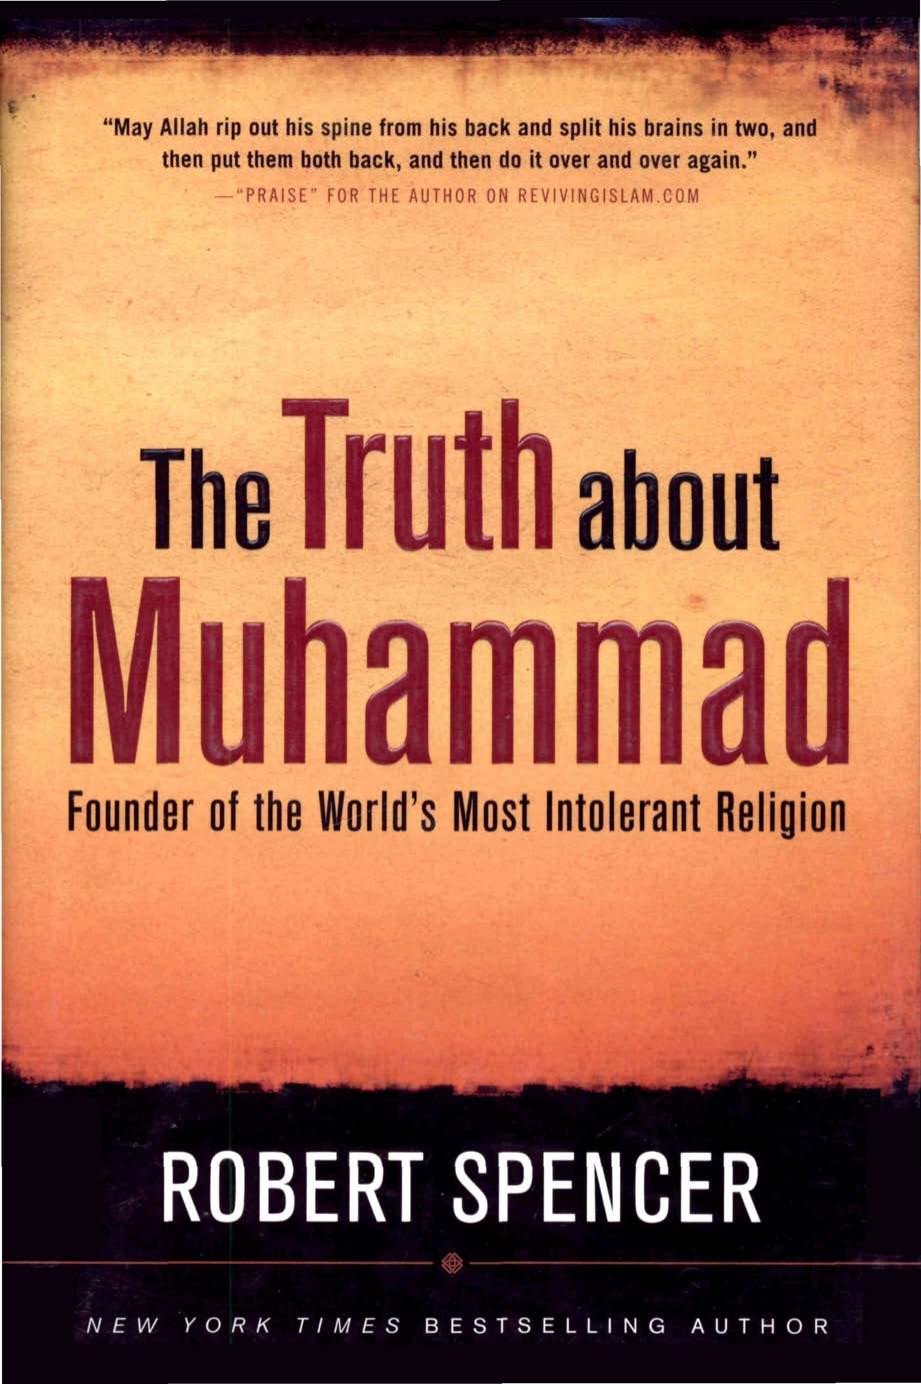 The Truth About Muhammad: Founder of the World's Most Intolerant Religion (2006)